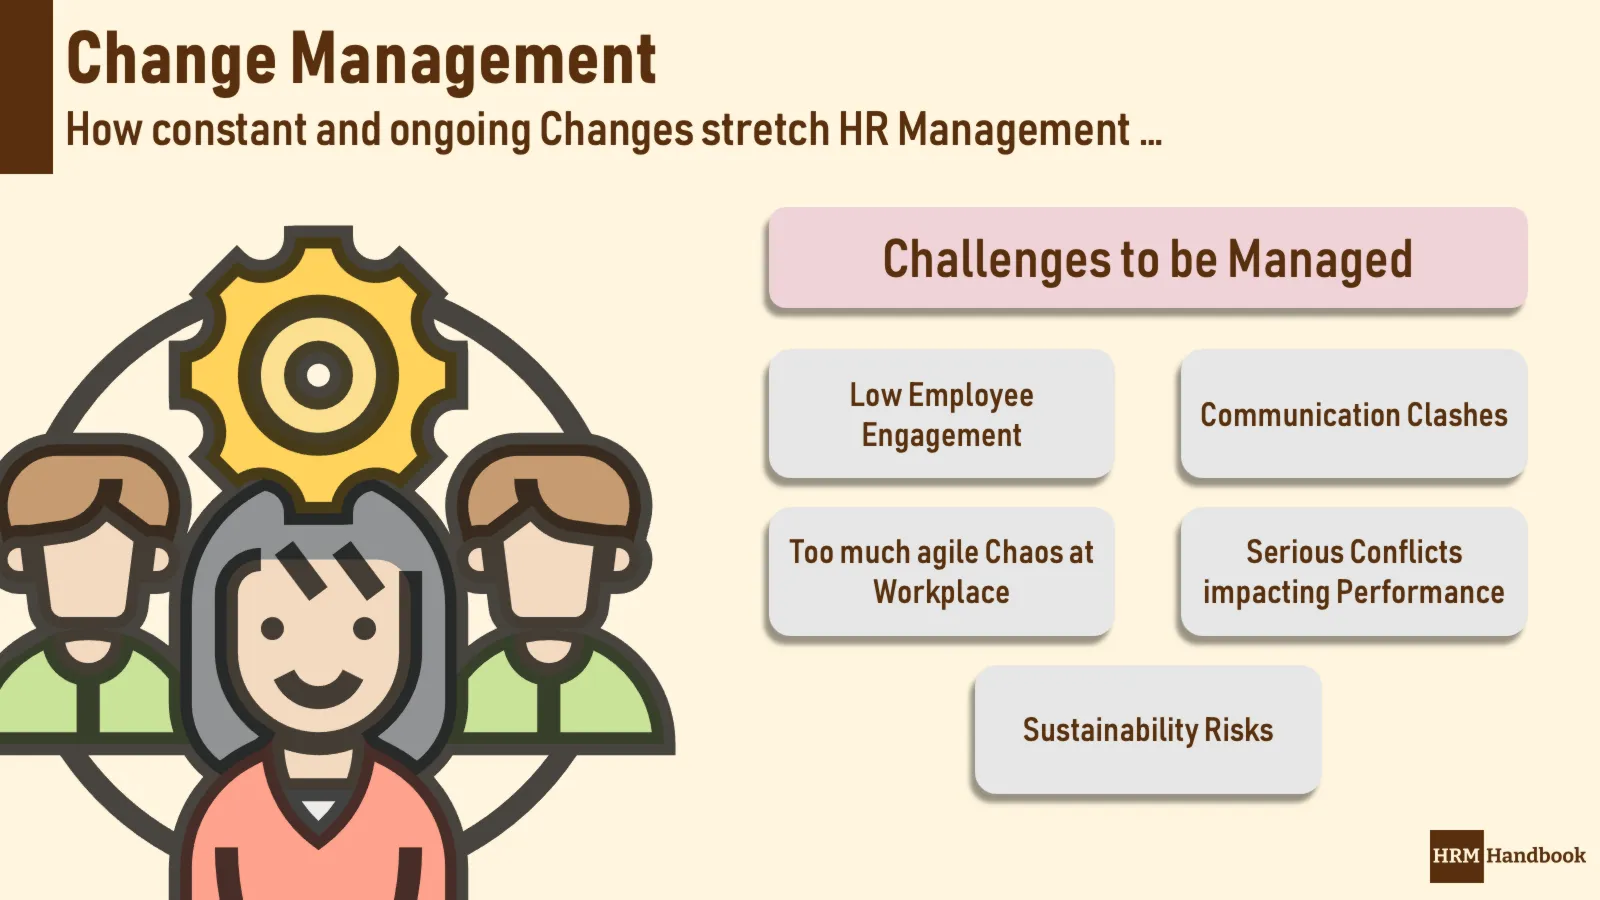 Change Management as an ongoing HR Challenge